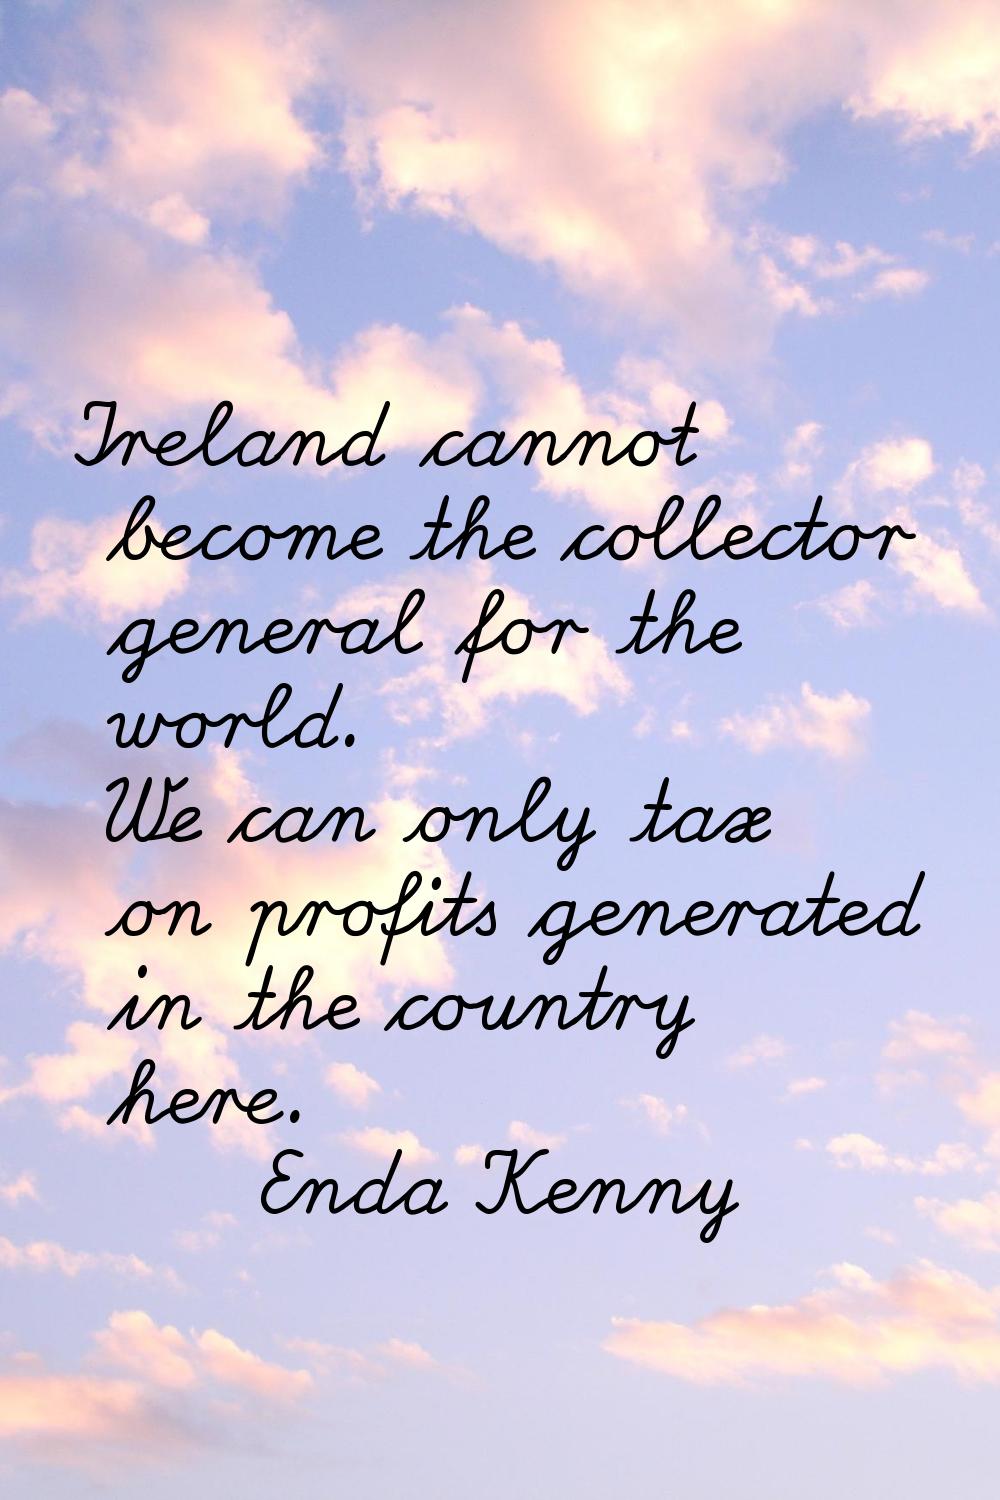 Ireland cannot become the collector general for the world. We can only tax on profits generated in 